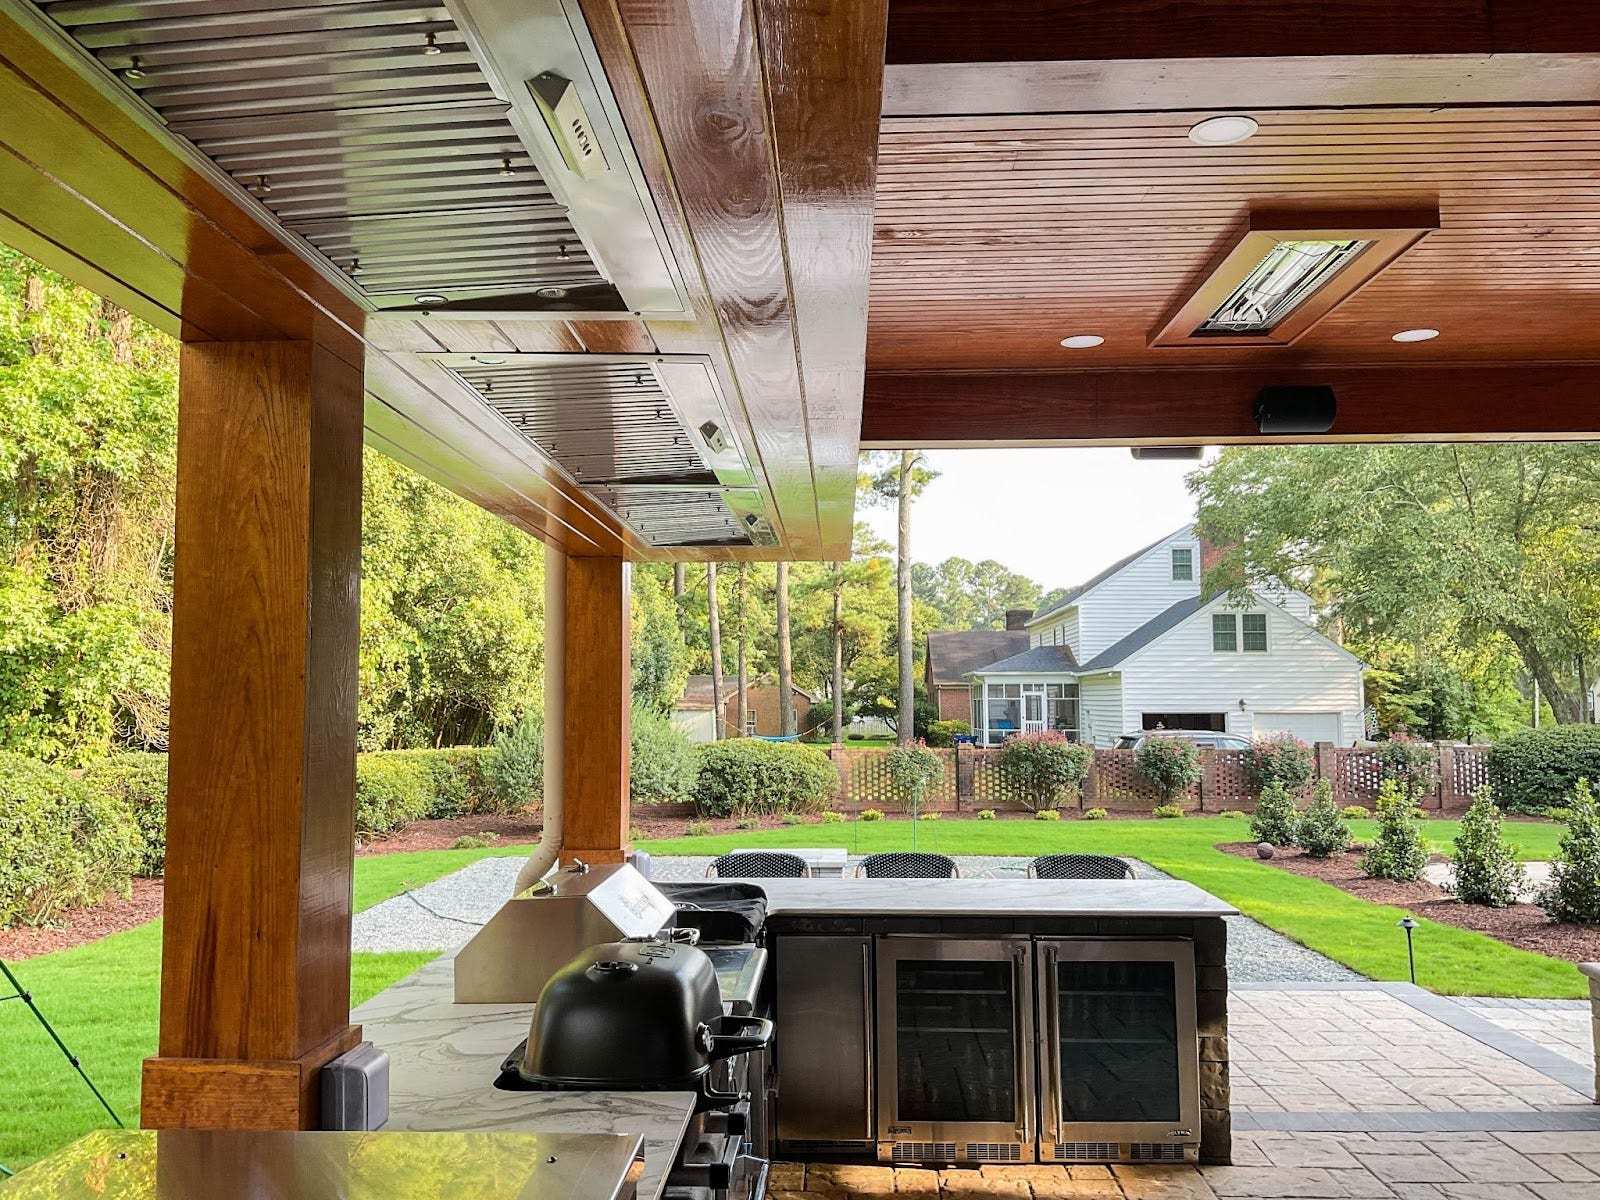 Chef's Outdoor Kitchen: Rustic meets modern! Sheltered patio with wood beams & stainless steel appliances. Multiple range hoods keep the air clear. Skylight bathes the space in light. Landscaped garden completes the view. - Proline Range Hoods - prolinerangehoods.com 